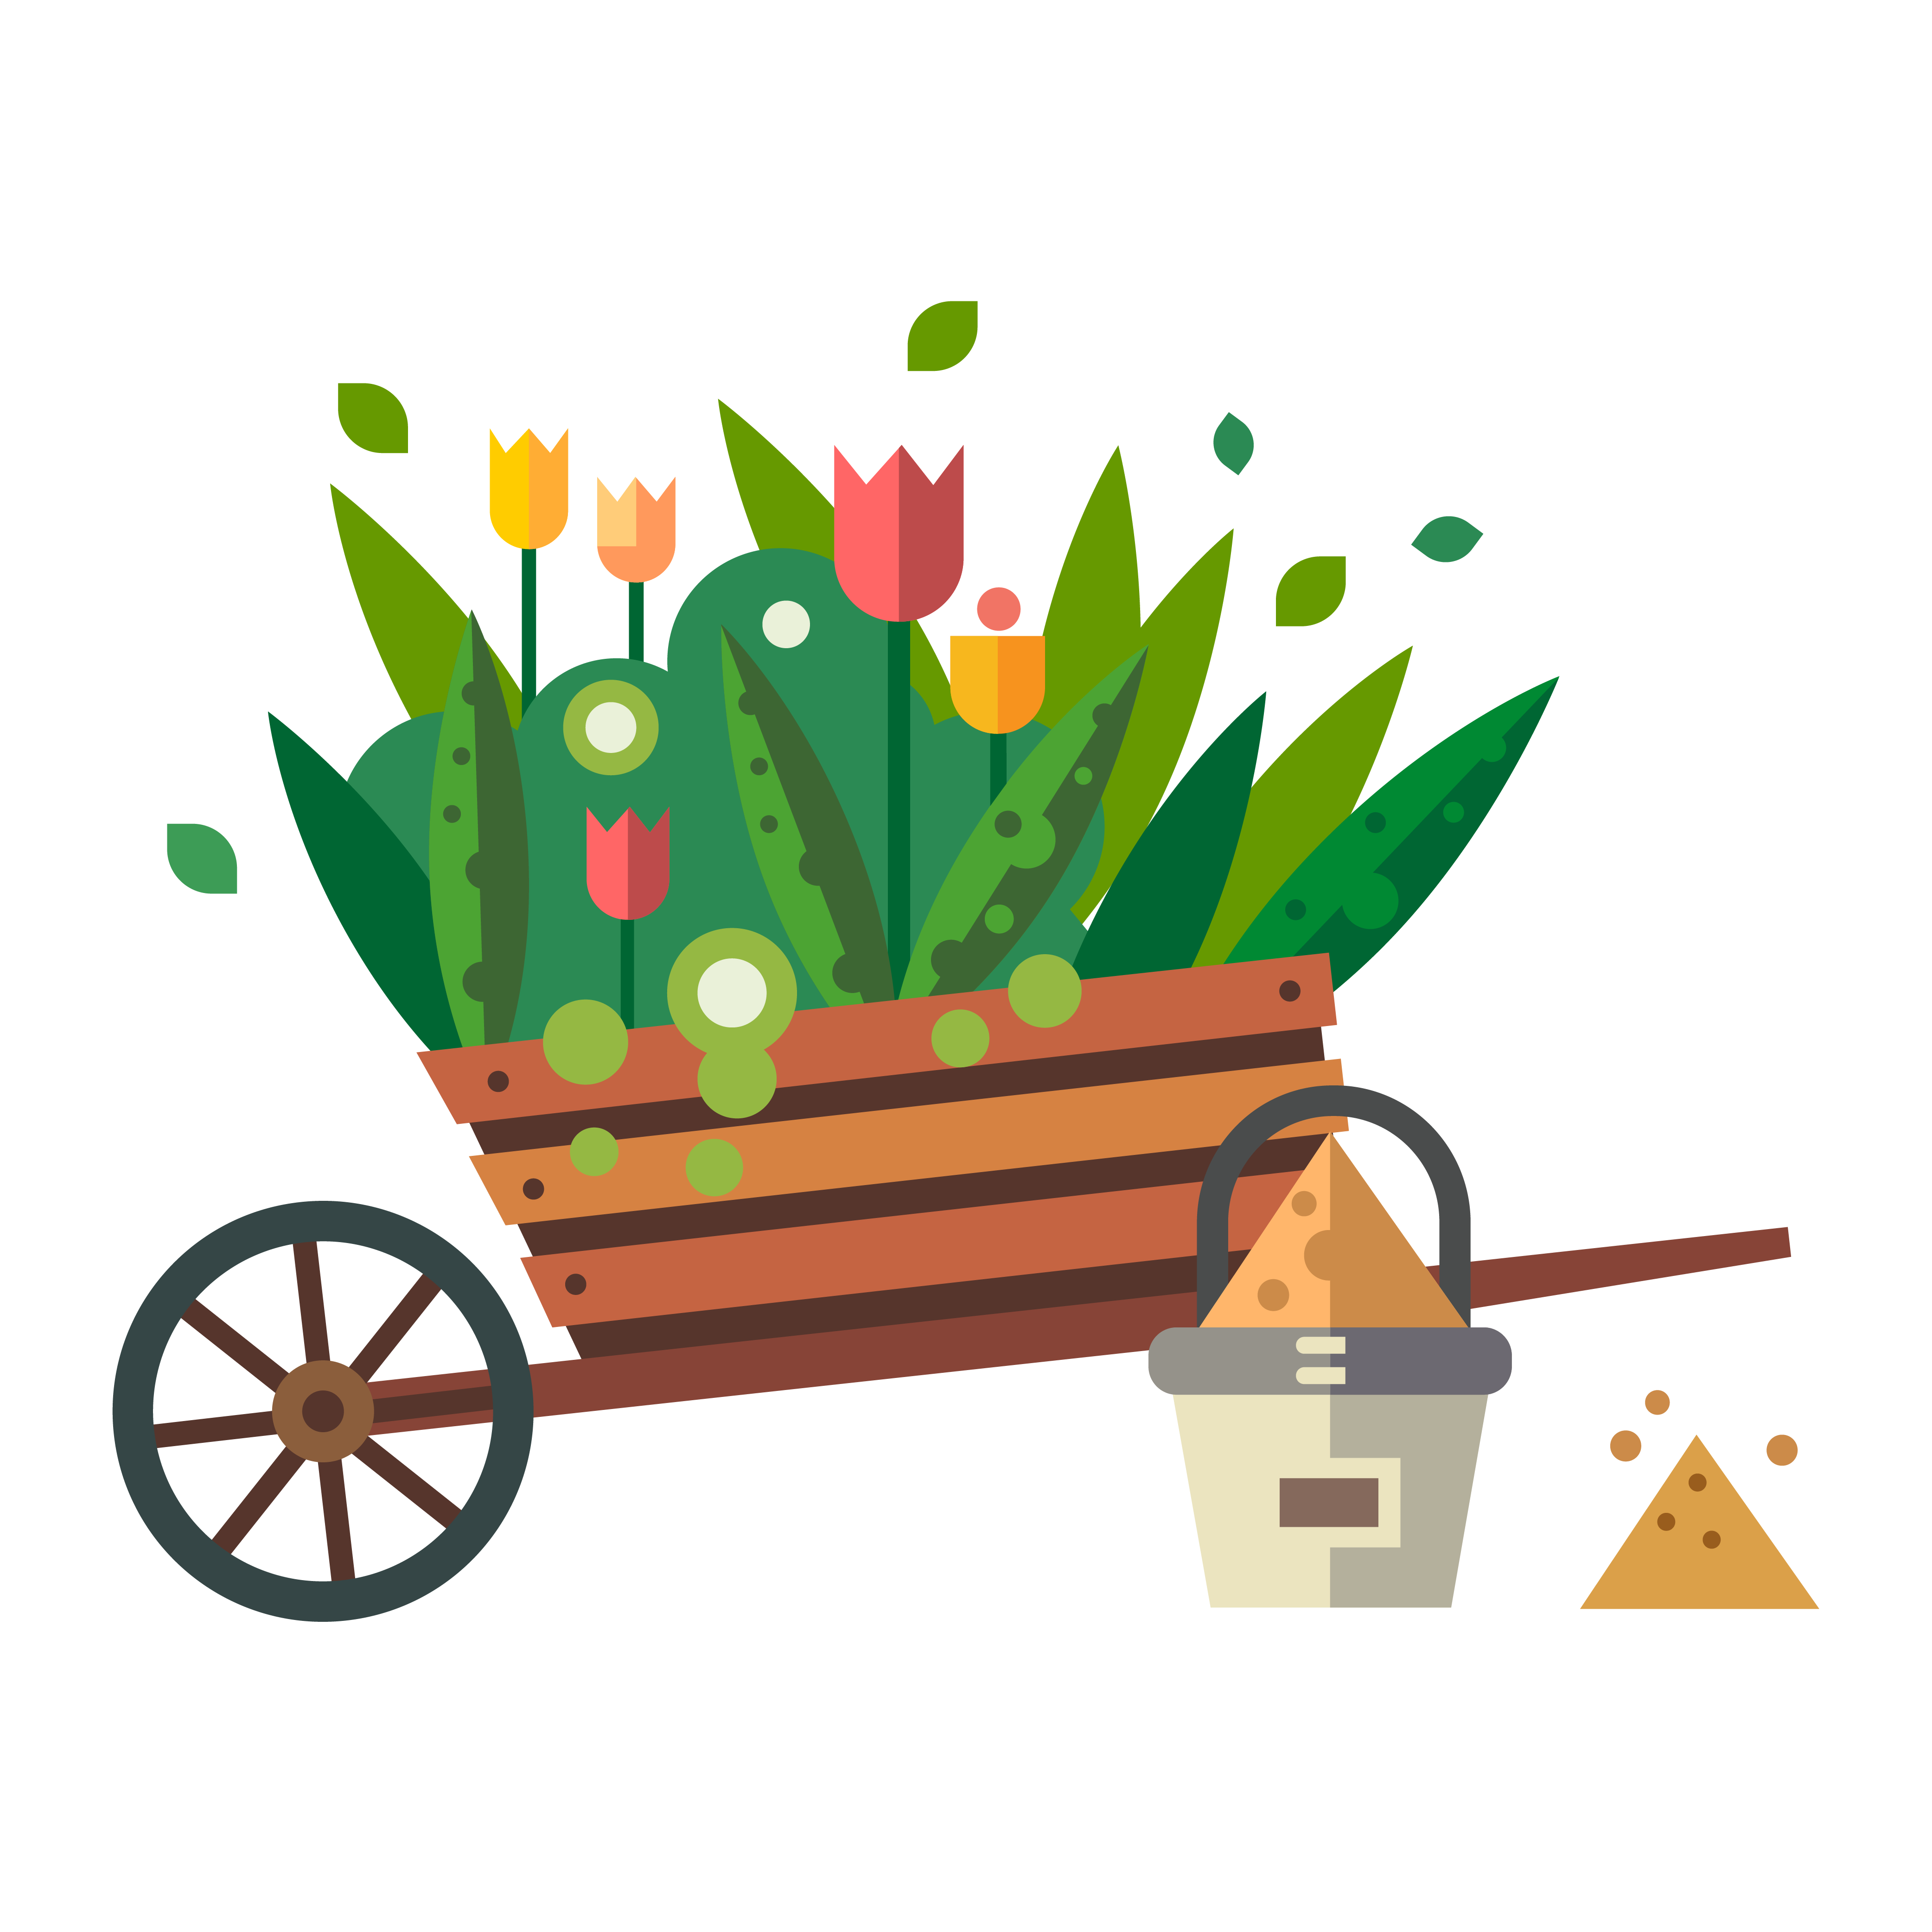 Landscaping clipart landscaping tool, Landscaping landscaping tool